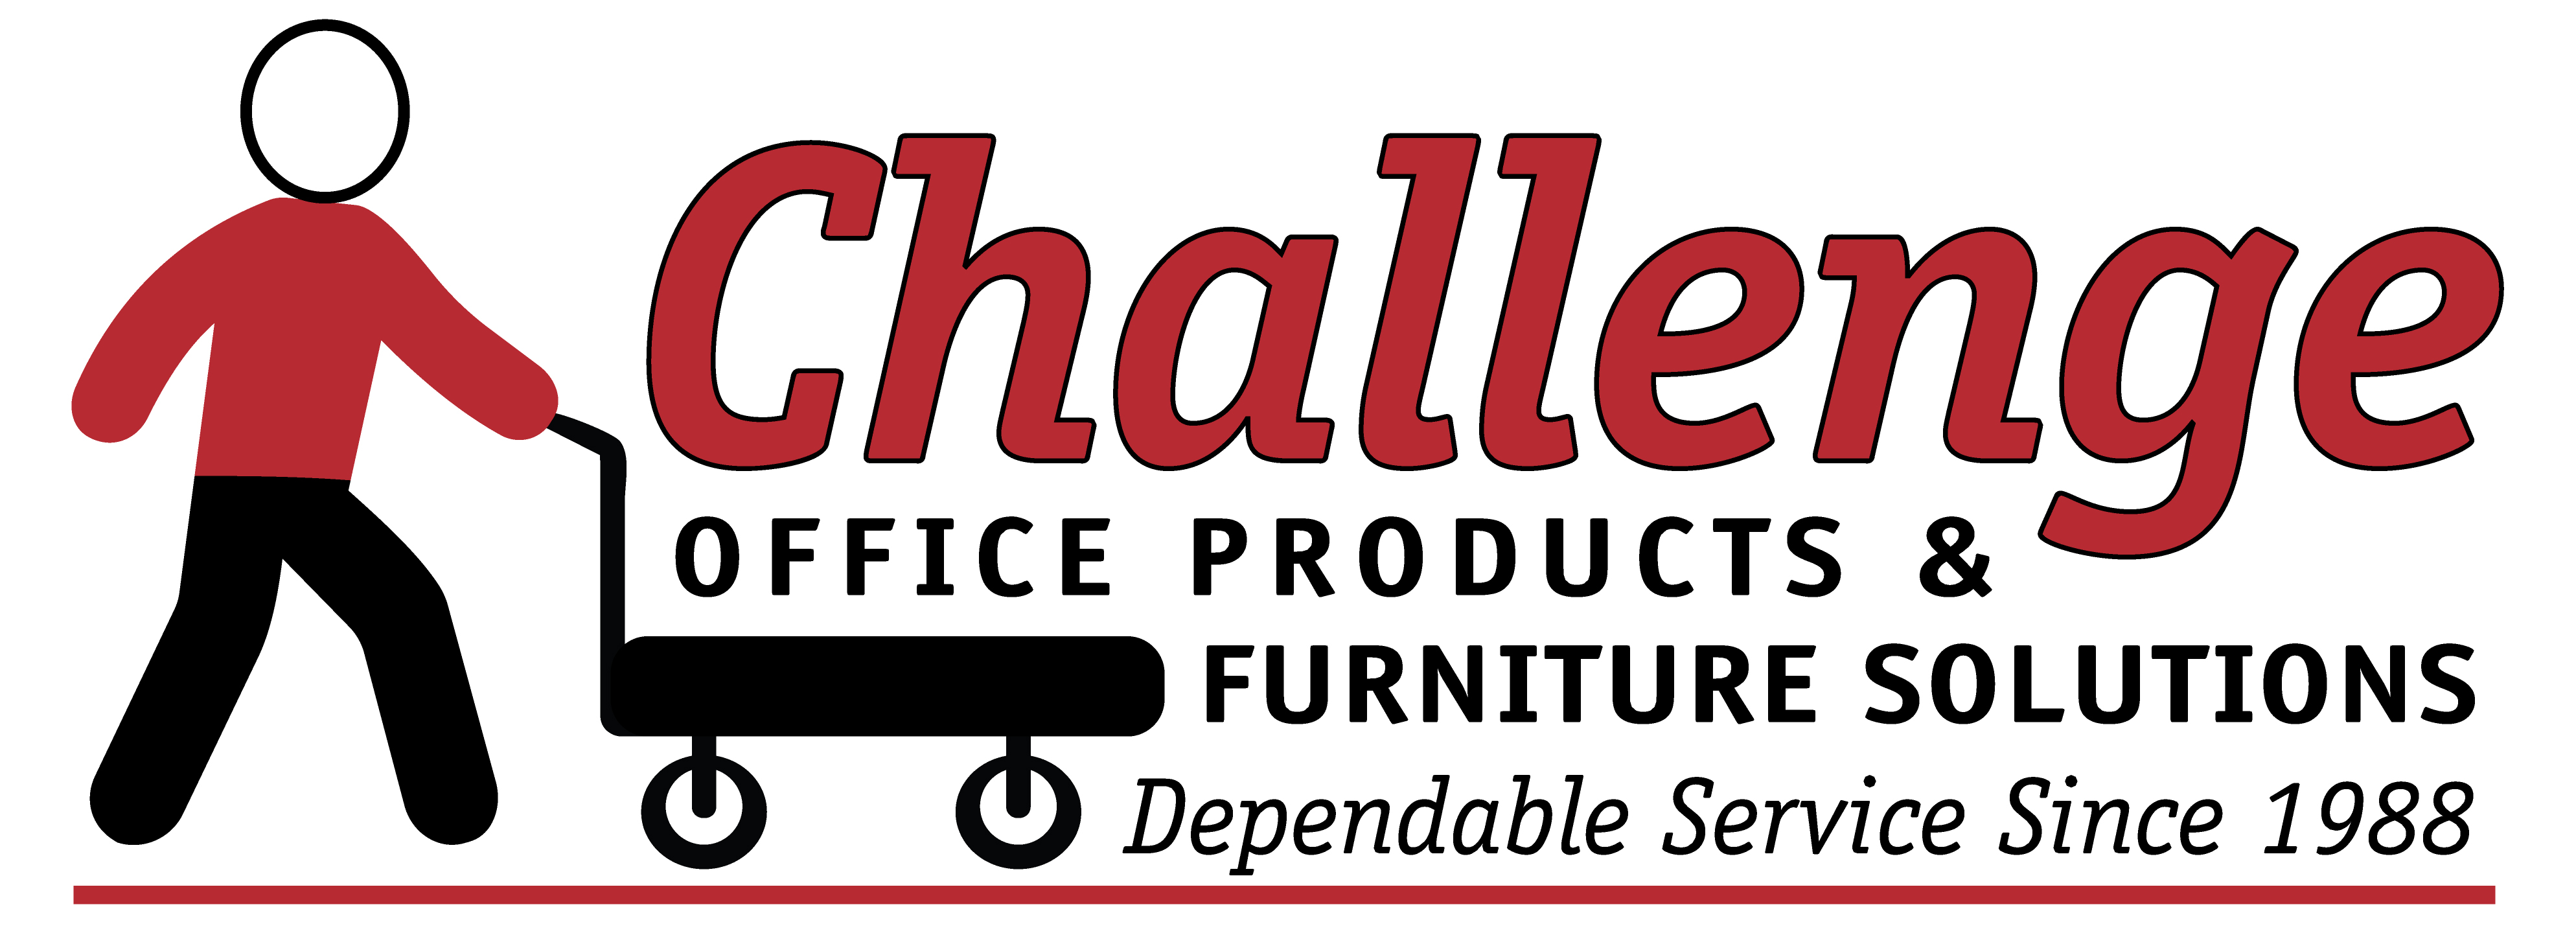 challenge-office-products-logo-1.jpg